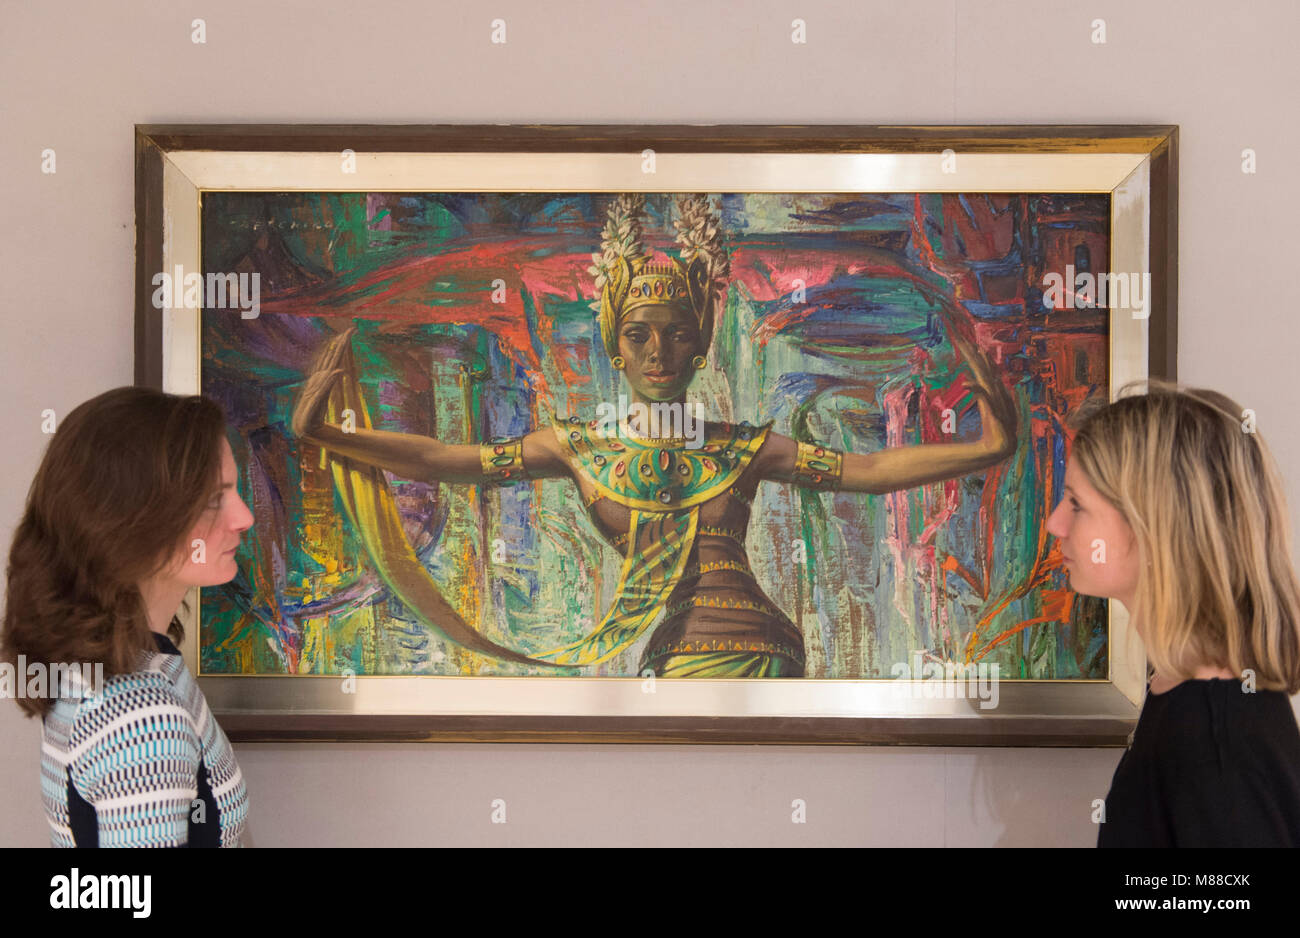 Bonhams, New Bond Street, London, UK. 16 March 2018. Balinese Dancer by Vladimir Tretchikoff at the photo call for Bonhams South African sale. It is estimated at £25,000-35,000. The artist famous for his blue Chinese woman portrait. Credit: Malcolm Park/Alamy Live News. Stock Photo